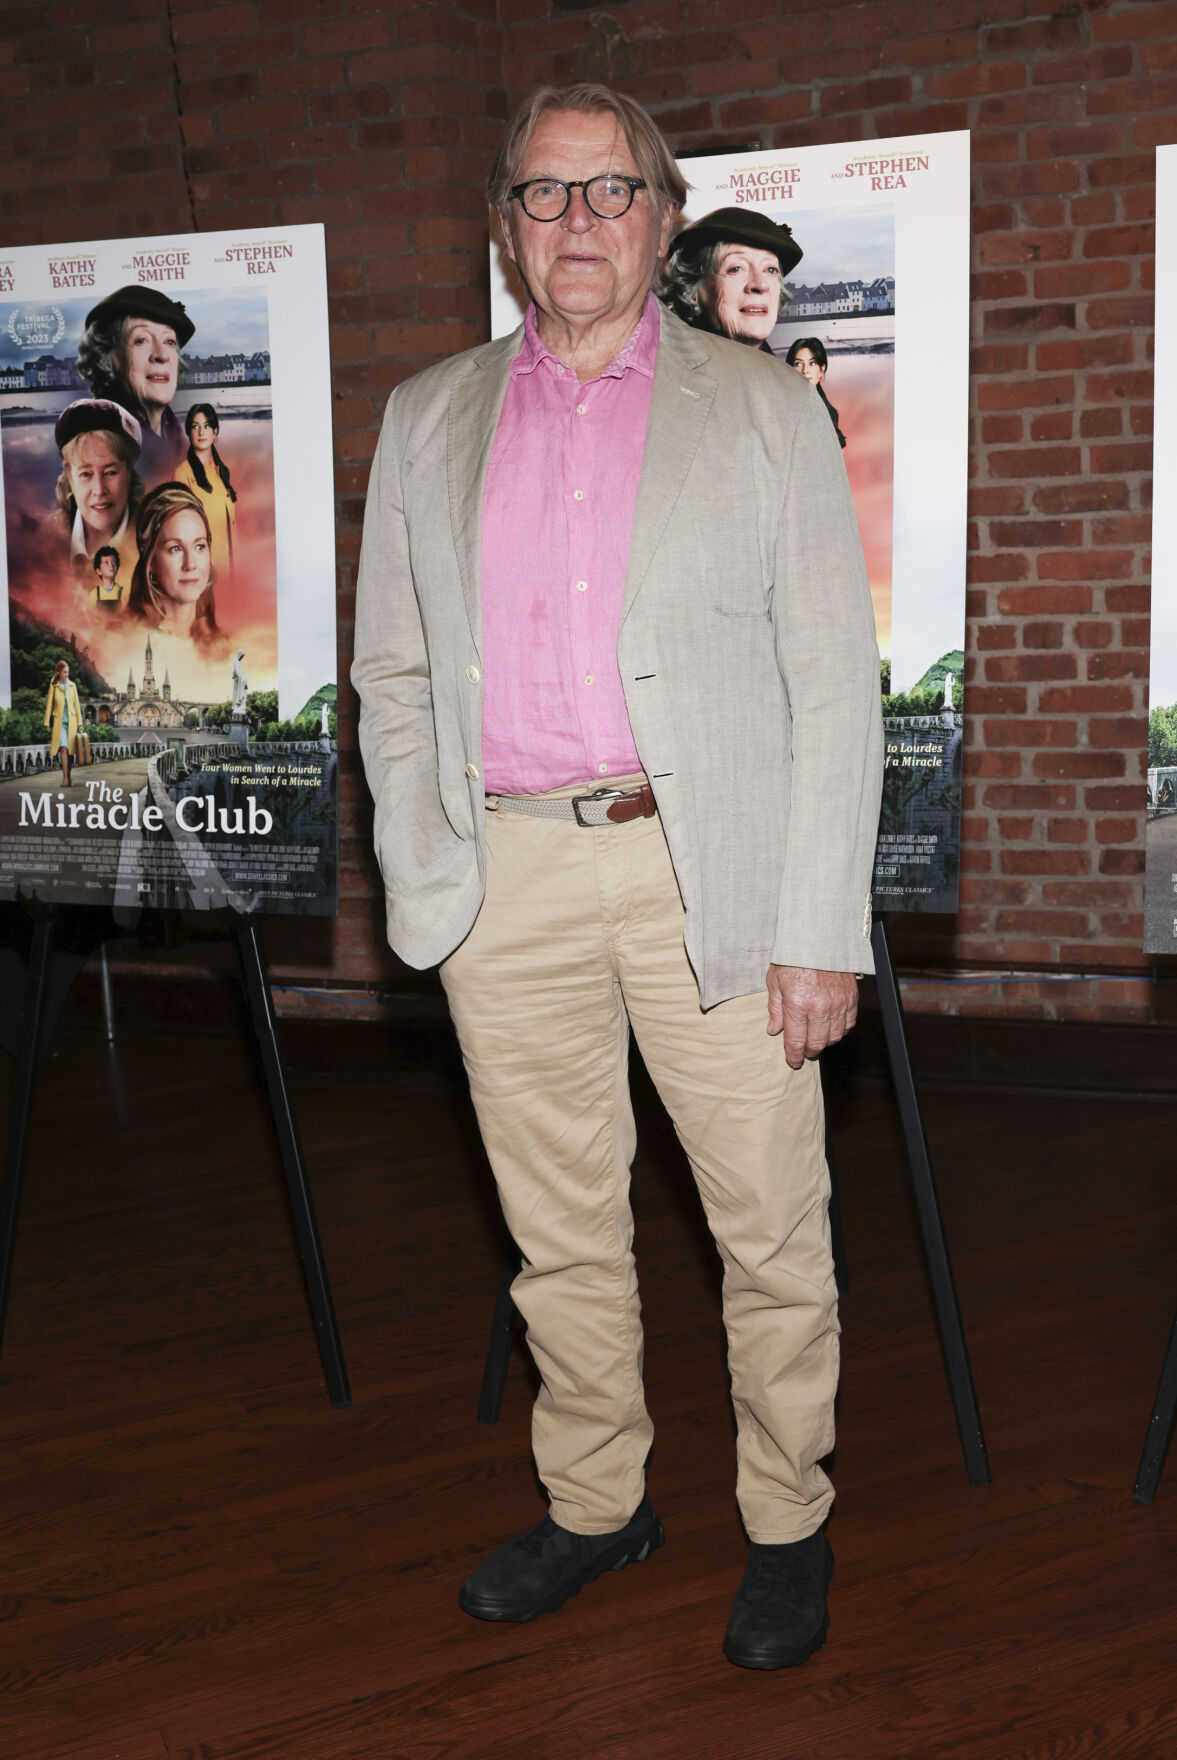 David Rasche at the special screening of "The Miracle Club", hosted by Sony Pictures Classics and The Cinema Society, on Tuesday, July 11, 2023, in New York.